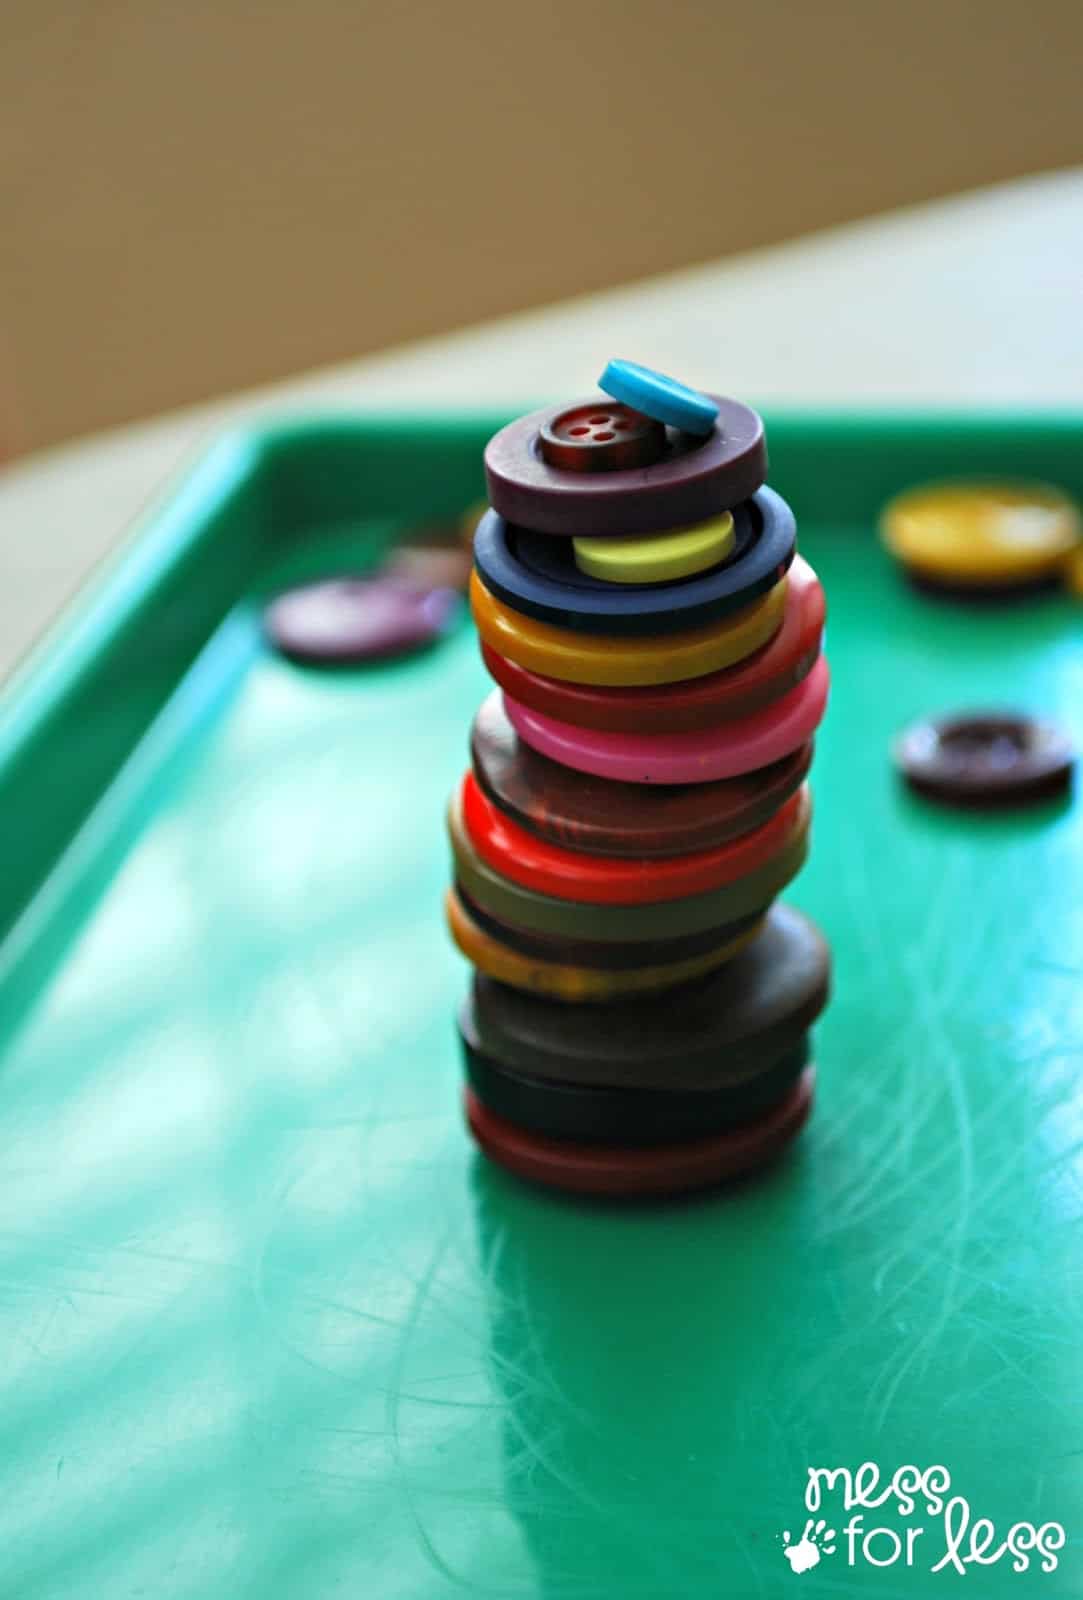 Button Stacking Game - Find out how simple this game is to play and what you need to play it anywhere. My kids loved it!